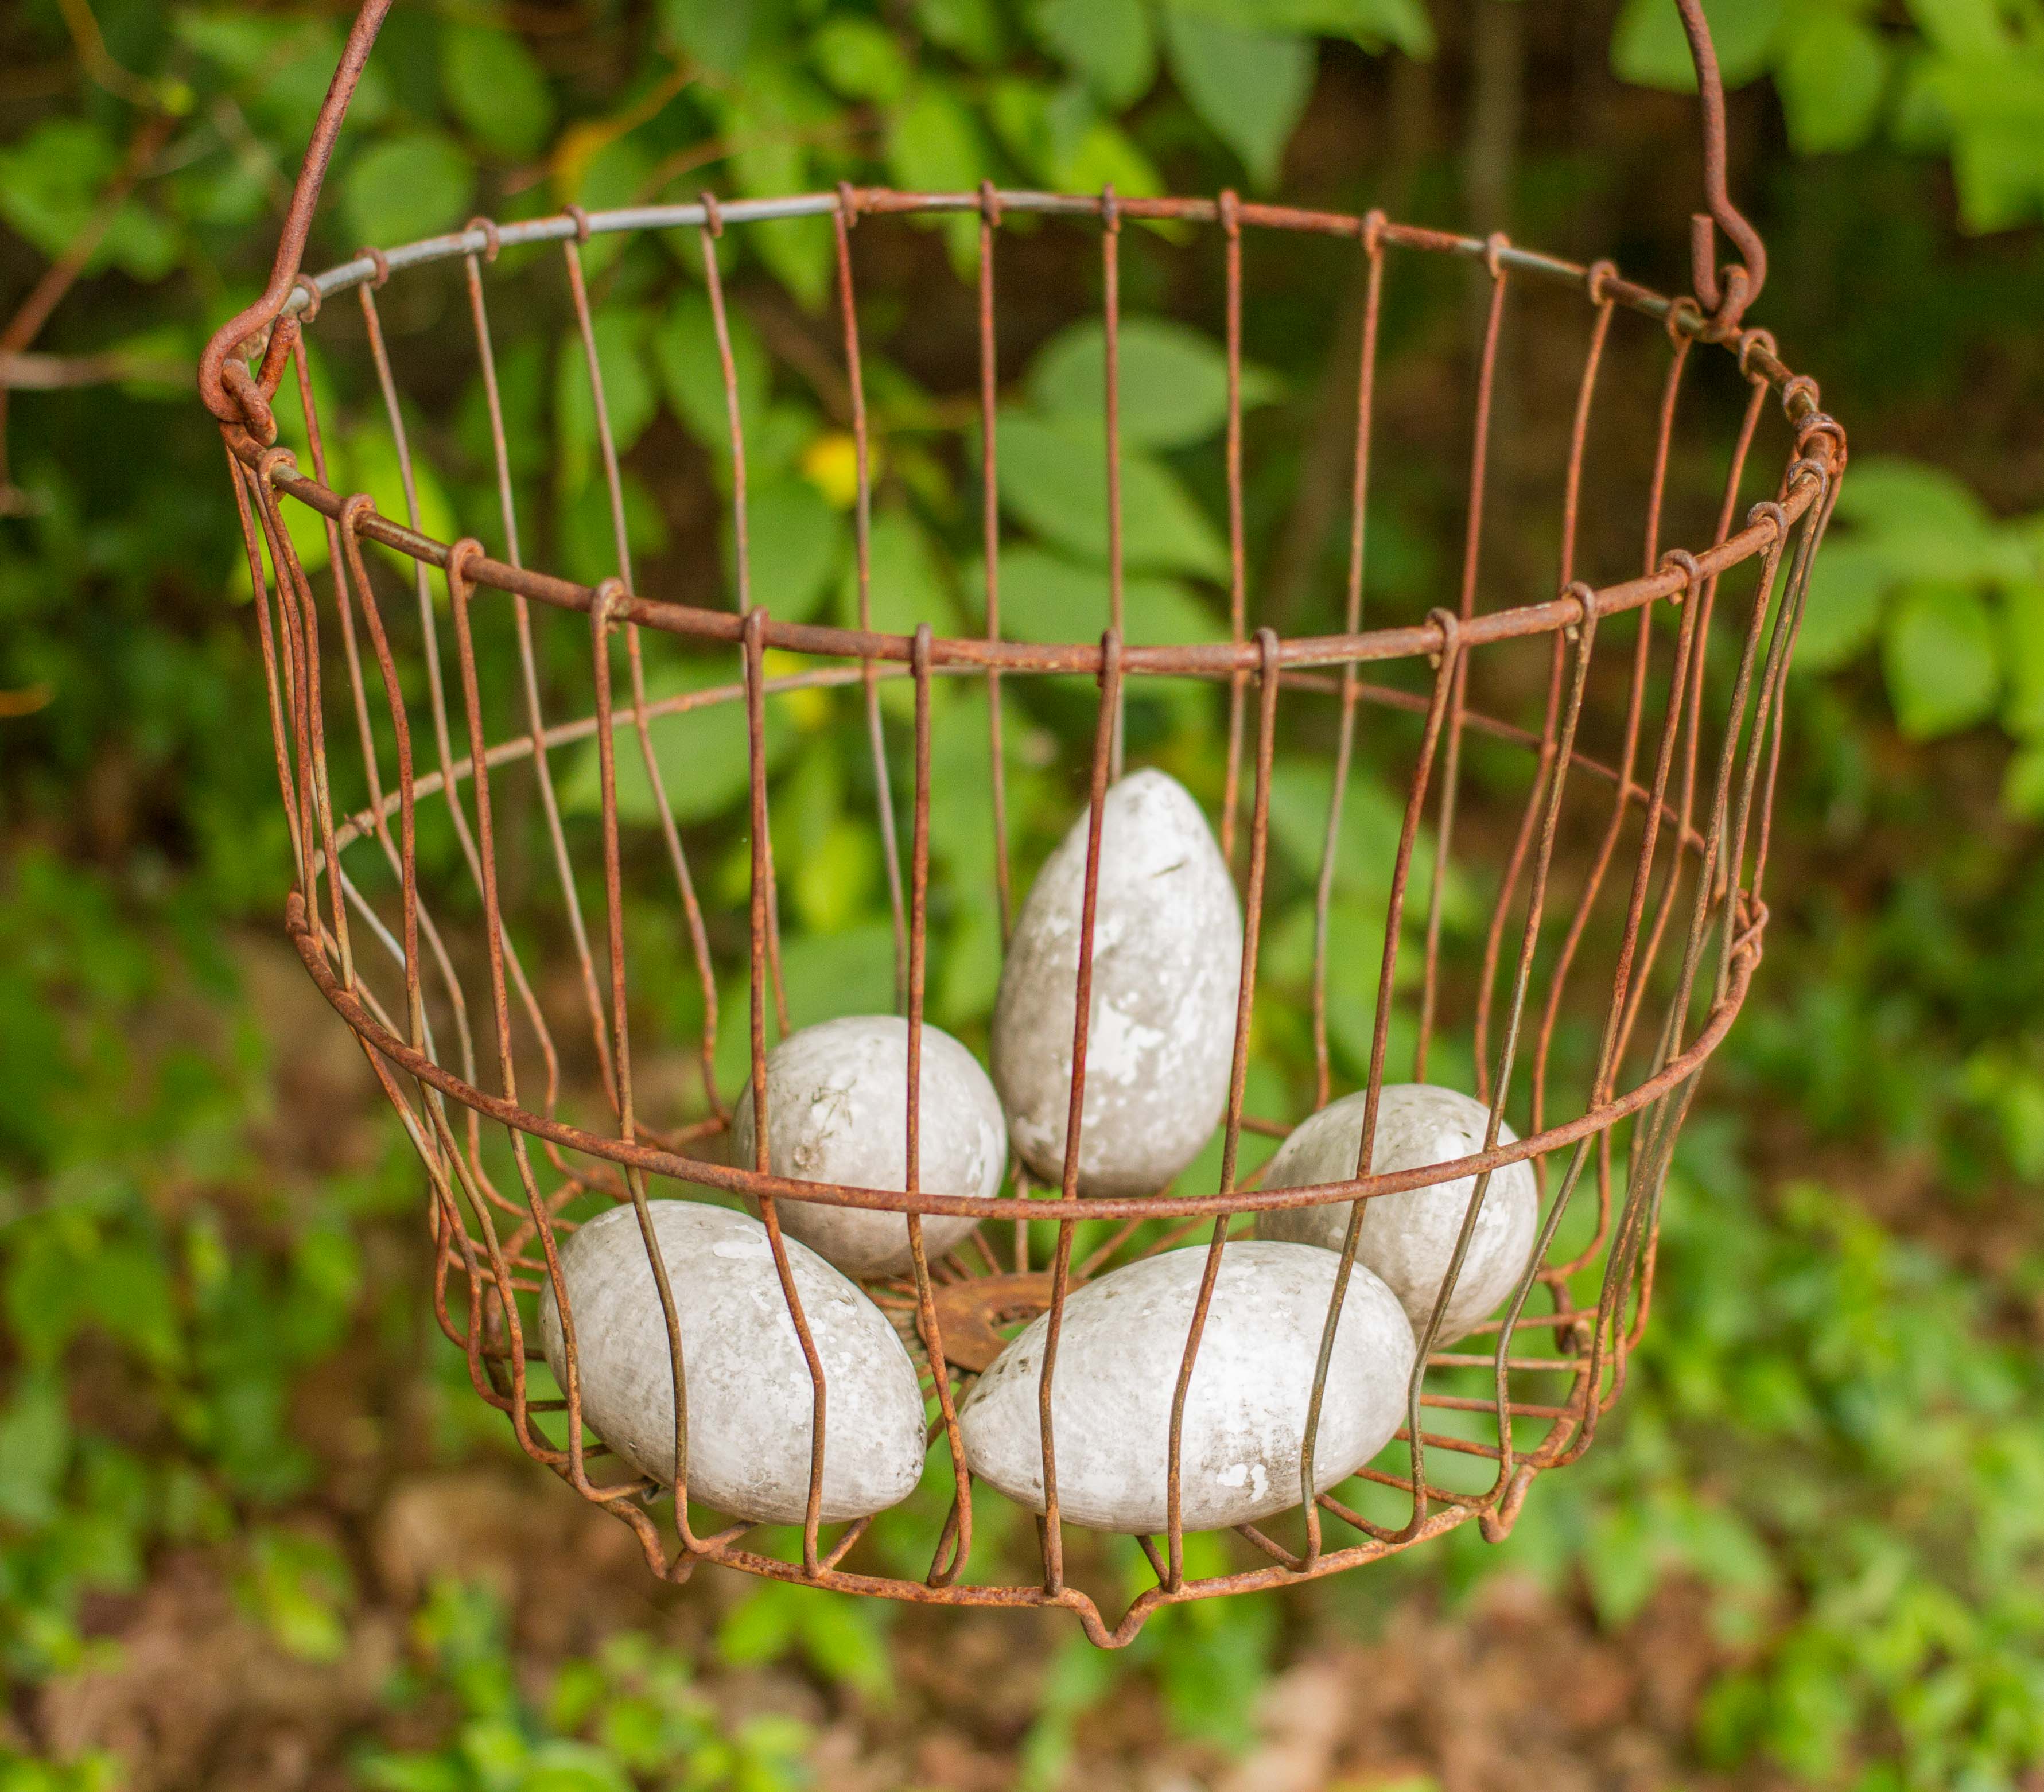 Egg Shaped Stones in Wire Basket